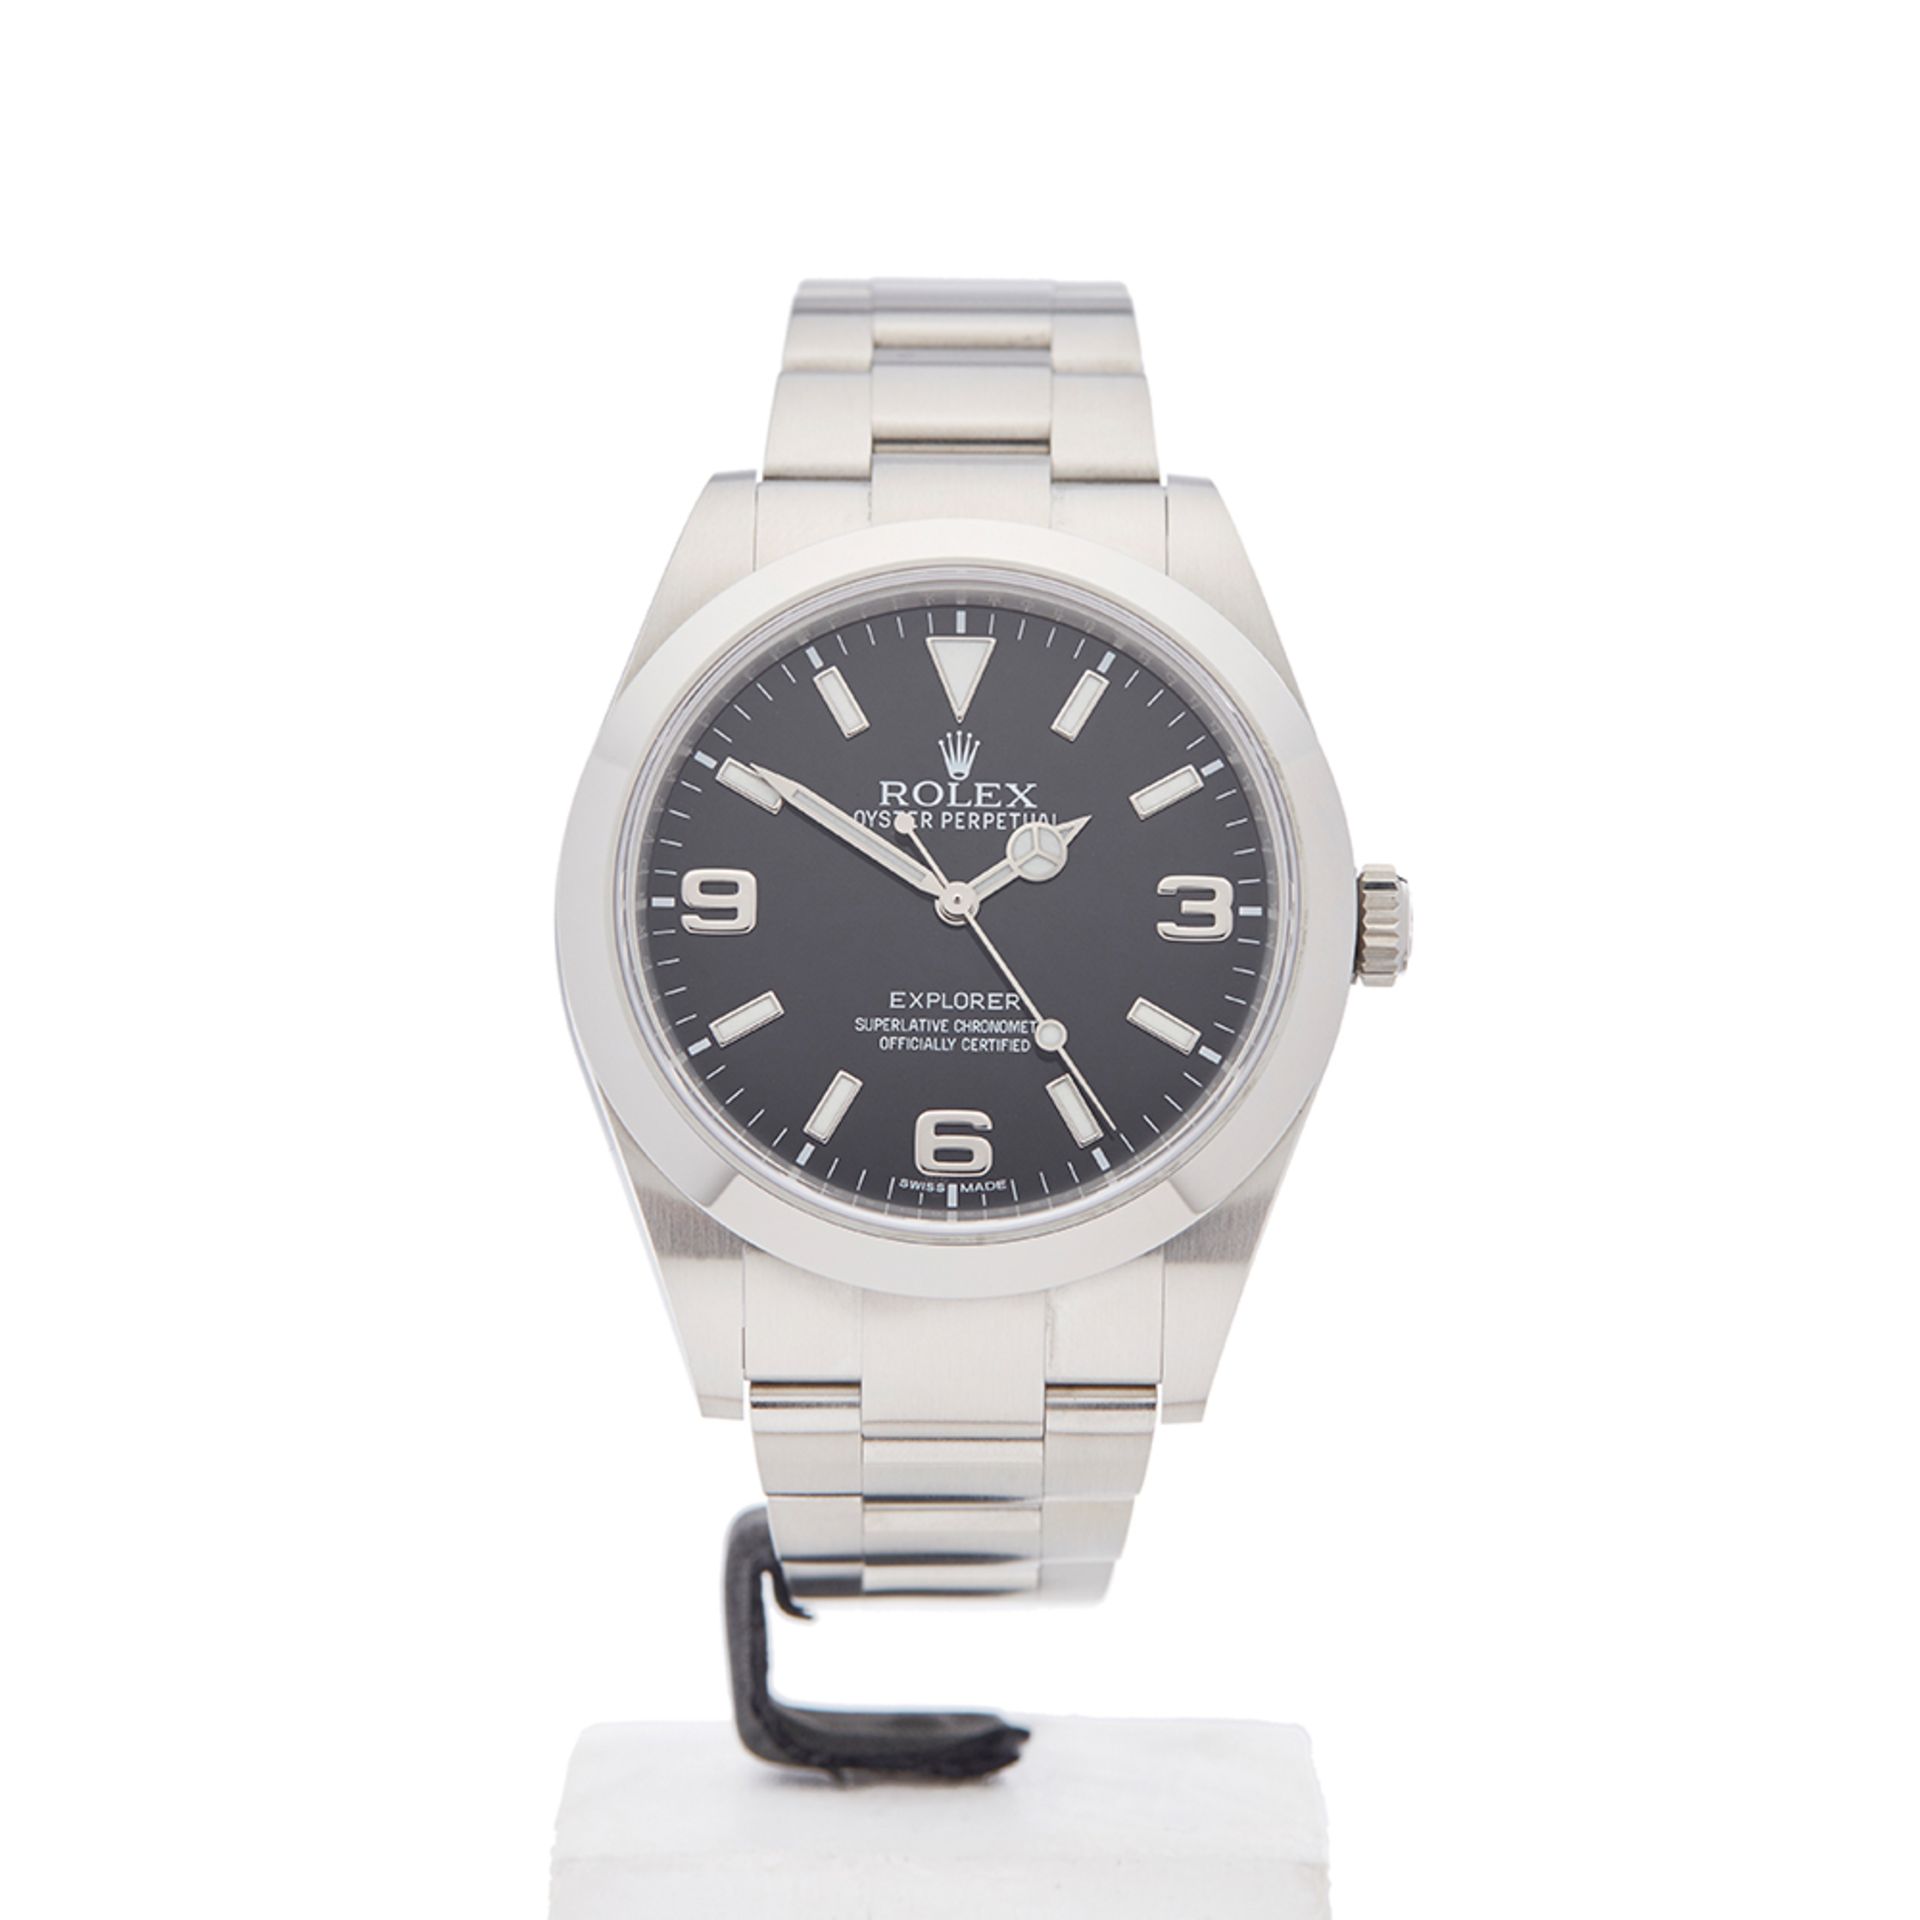 Rolex Explorer I 39mm Stainless Steel - 214270 - Image 2 of 9